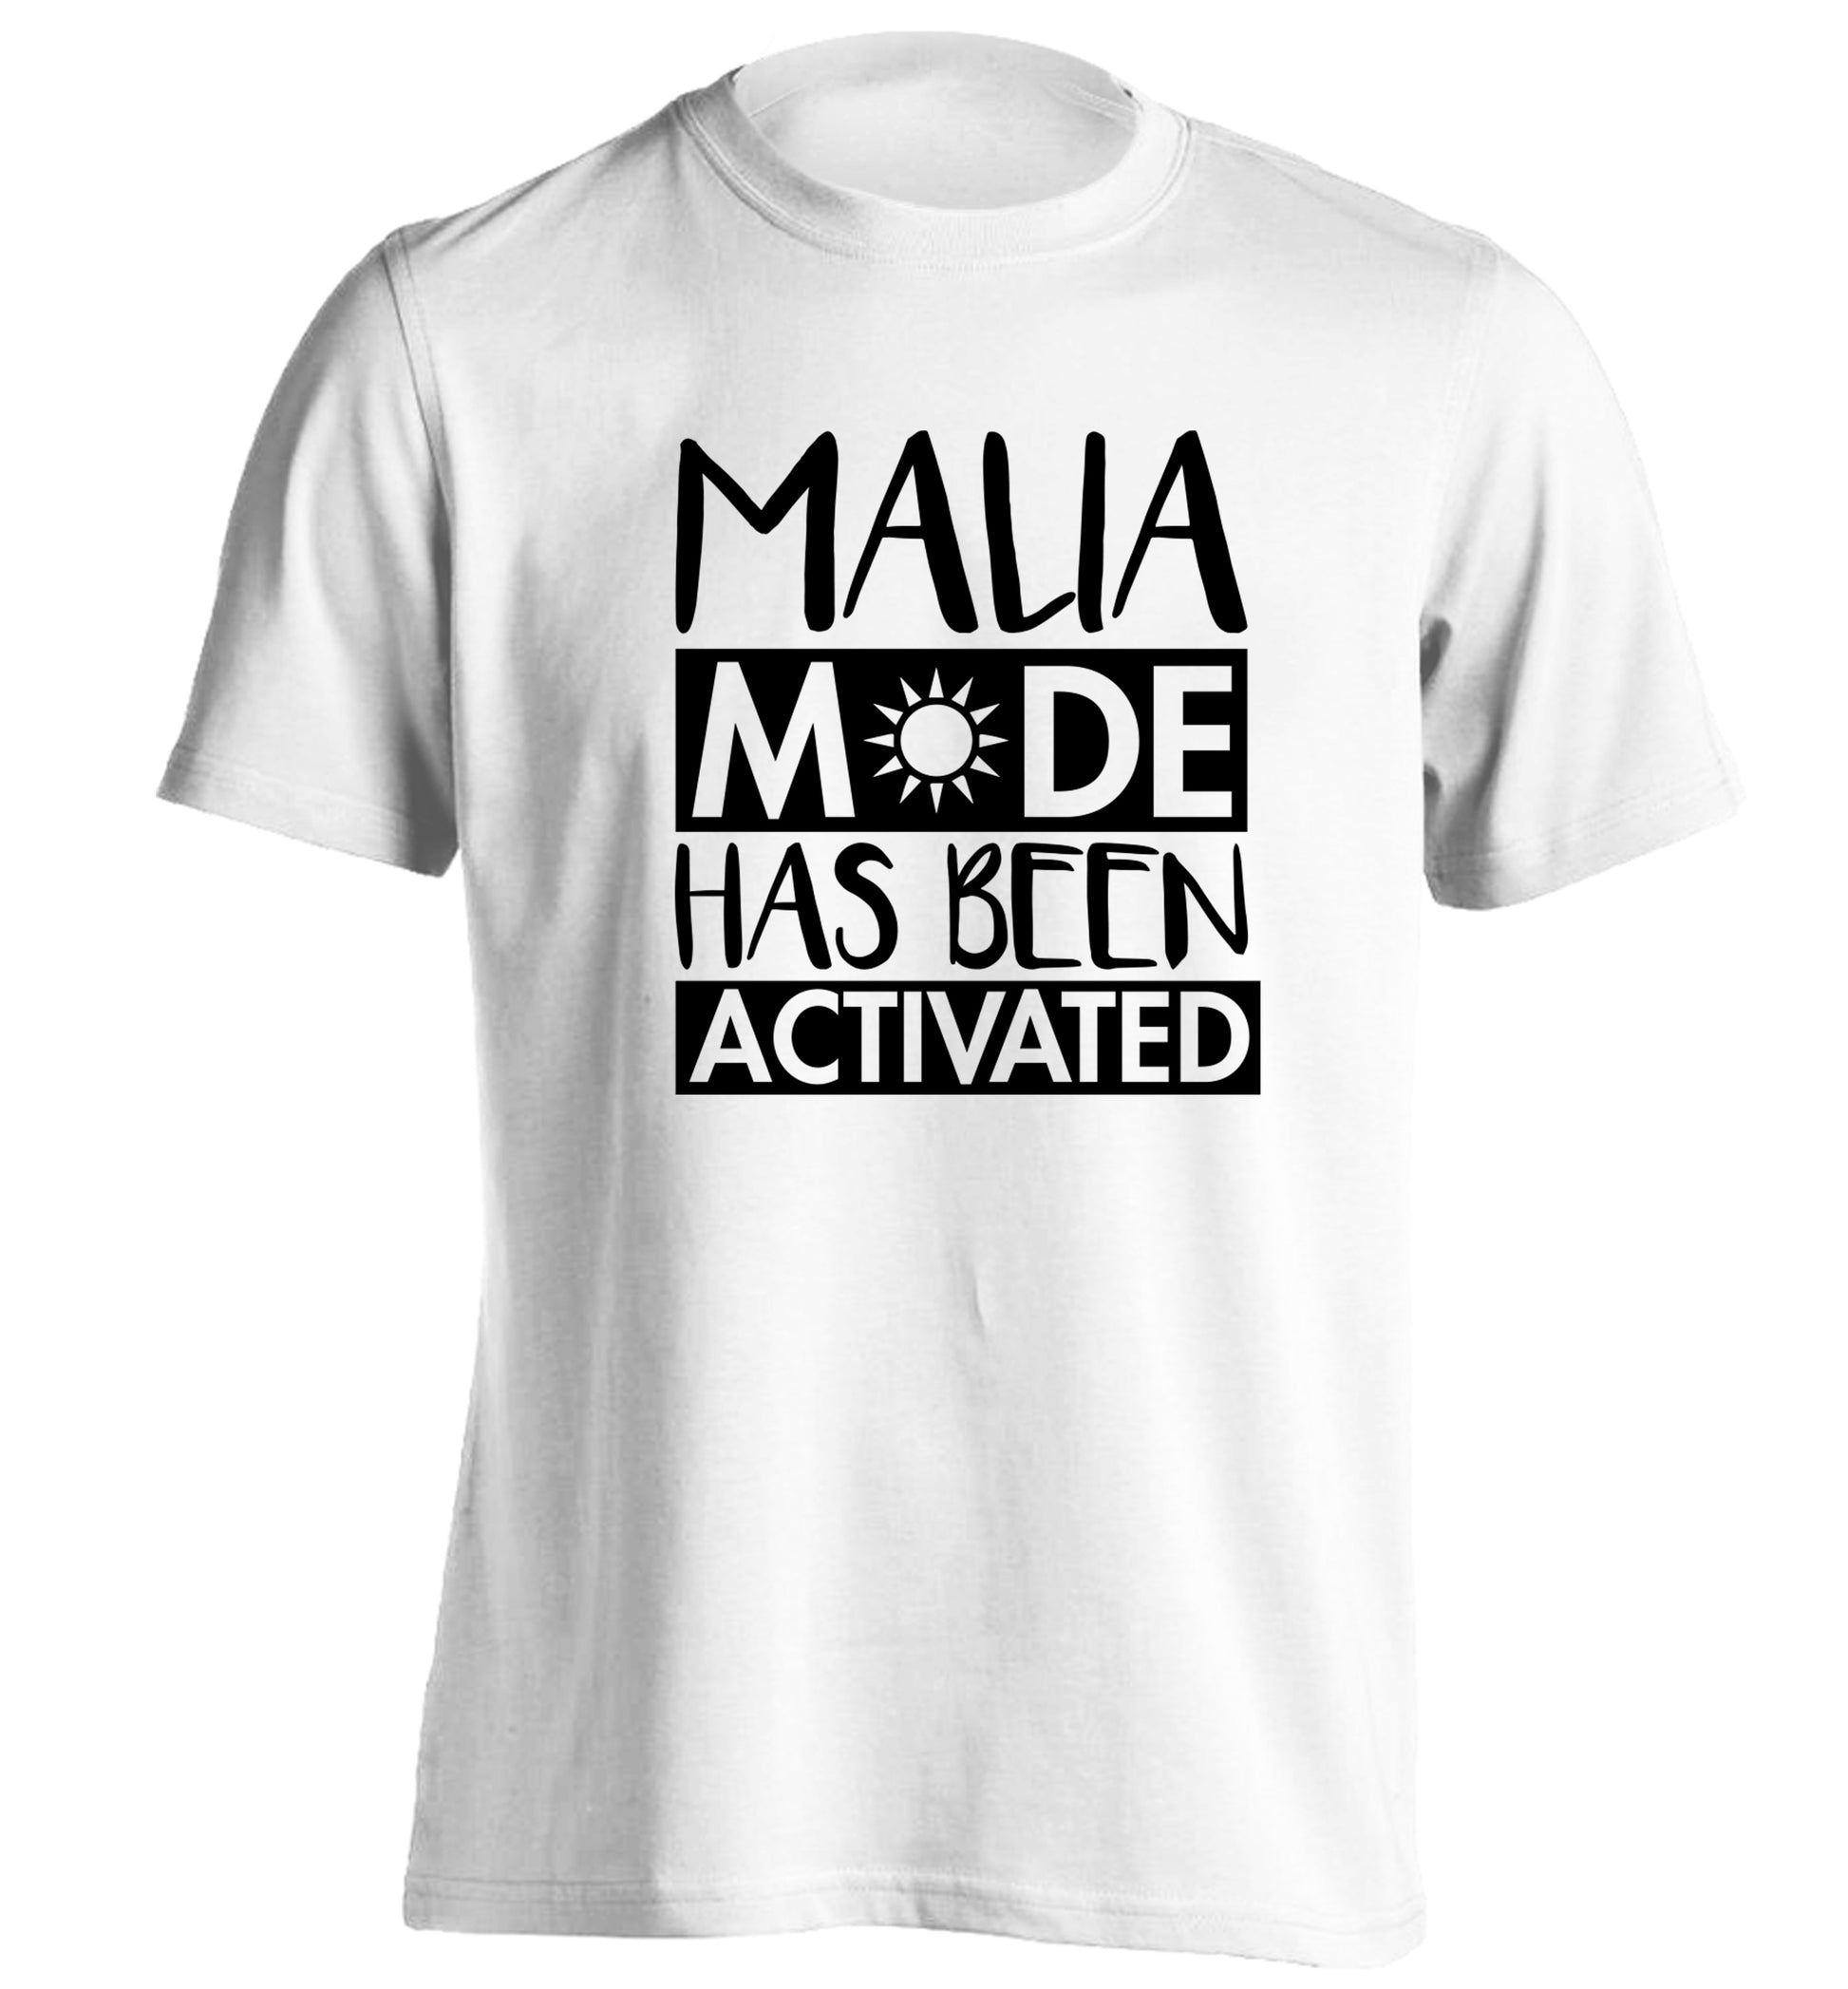 Malia mode has been activated adults unisex white Tshirt 2XL